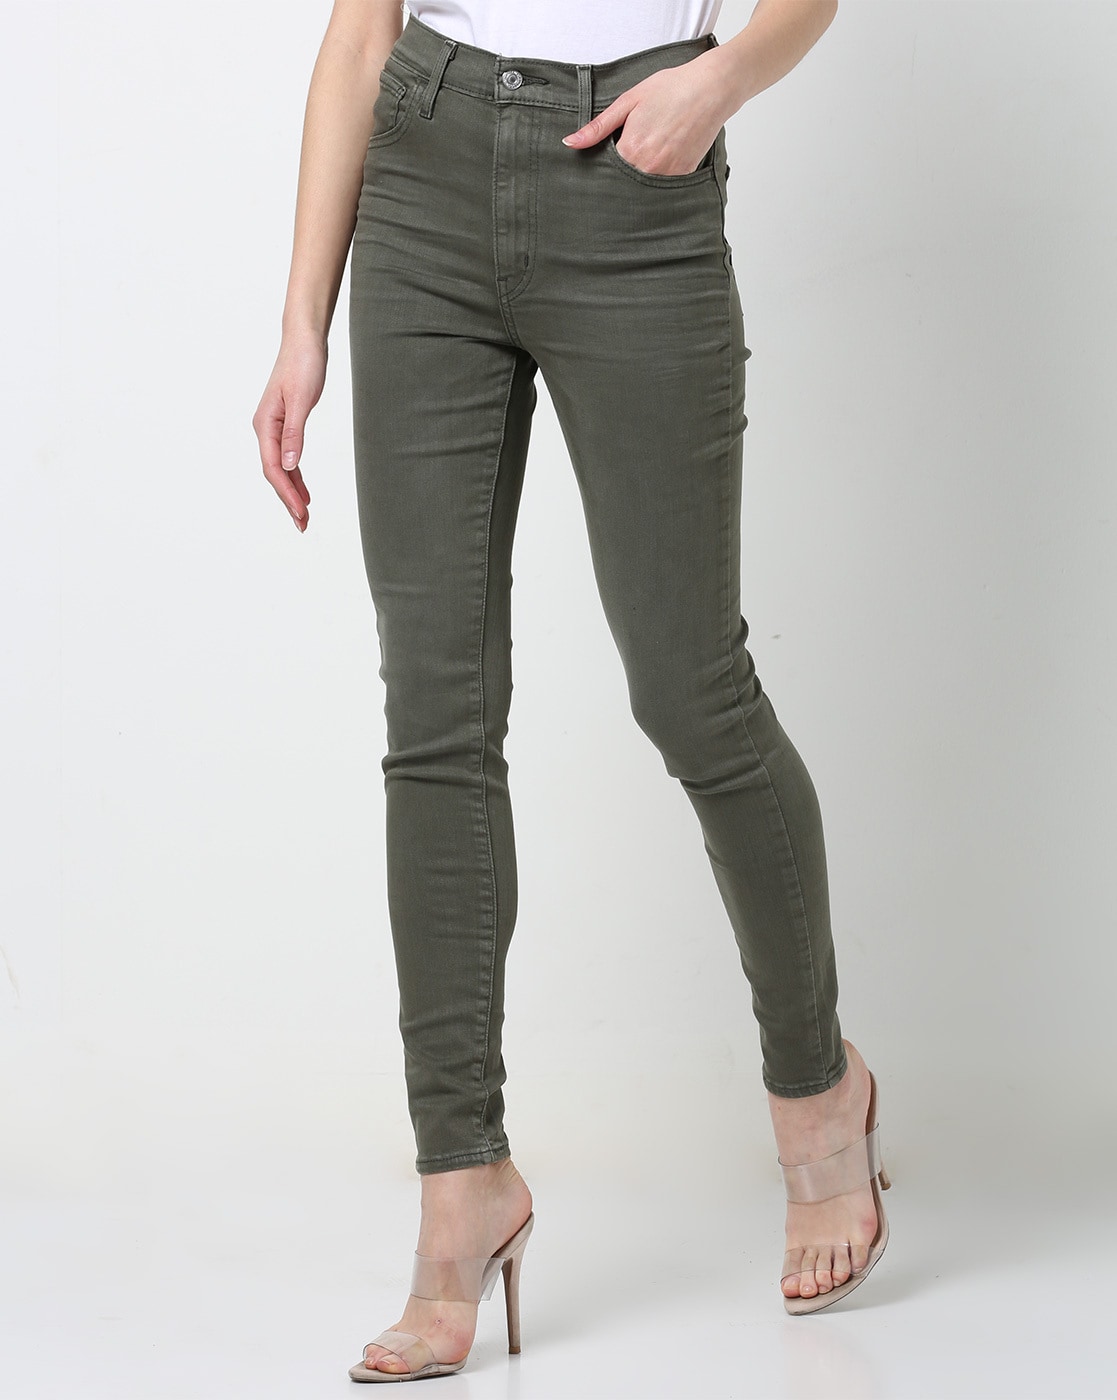 olive green levi jeans